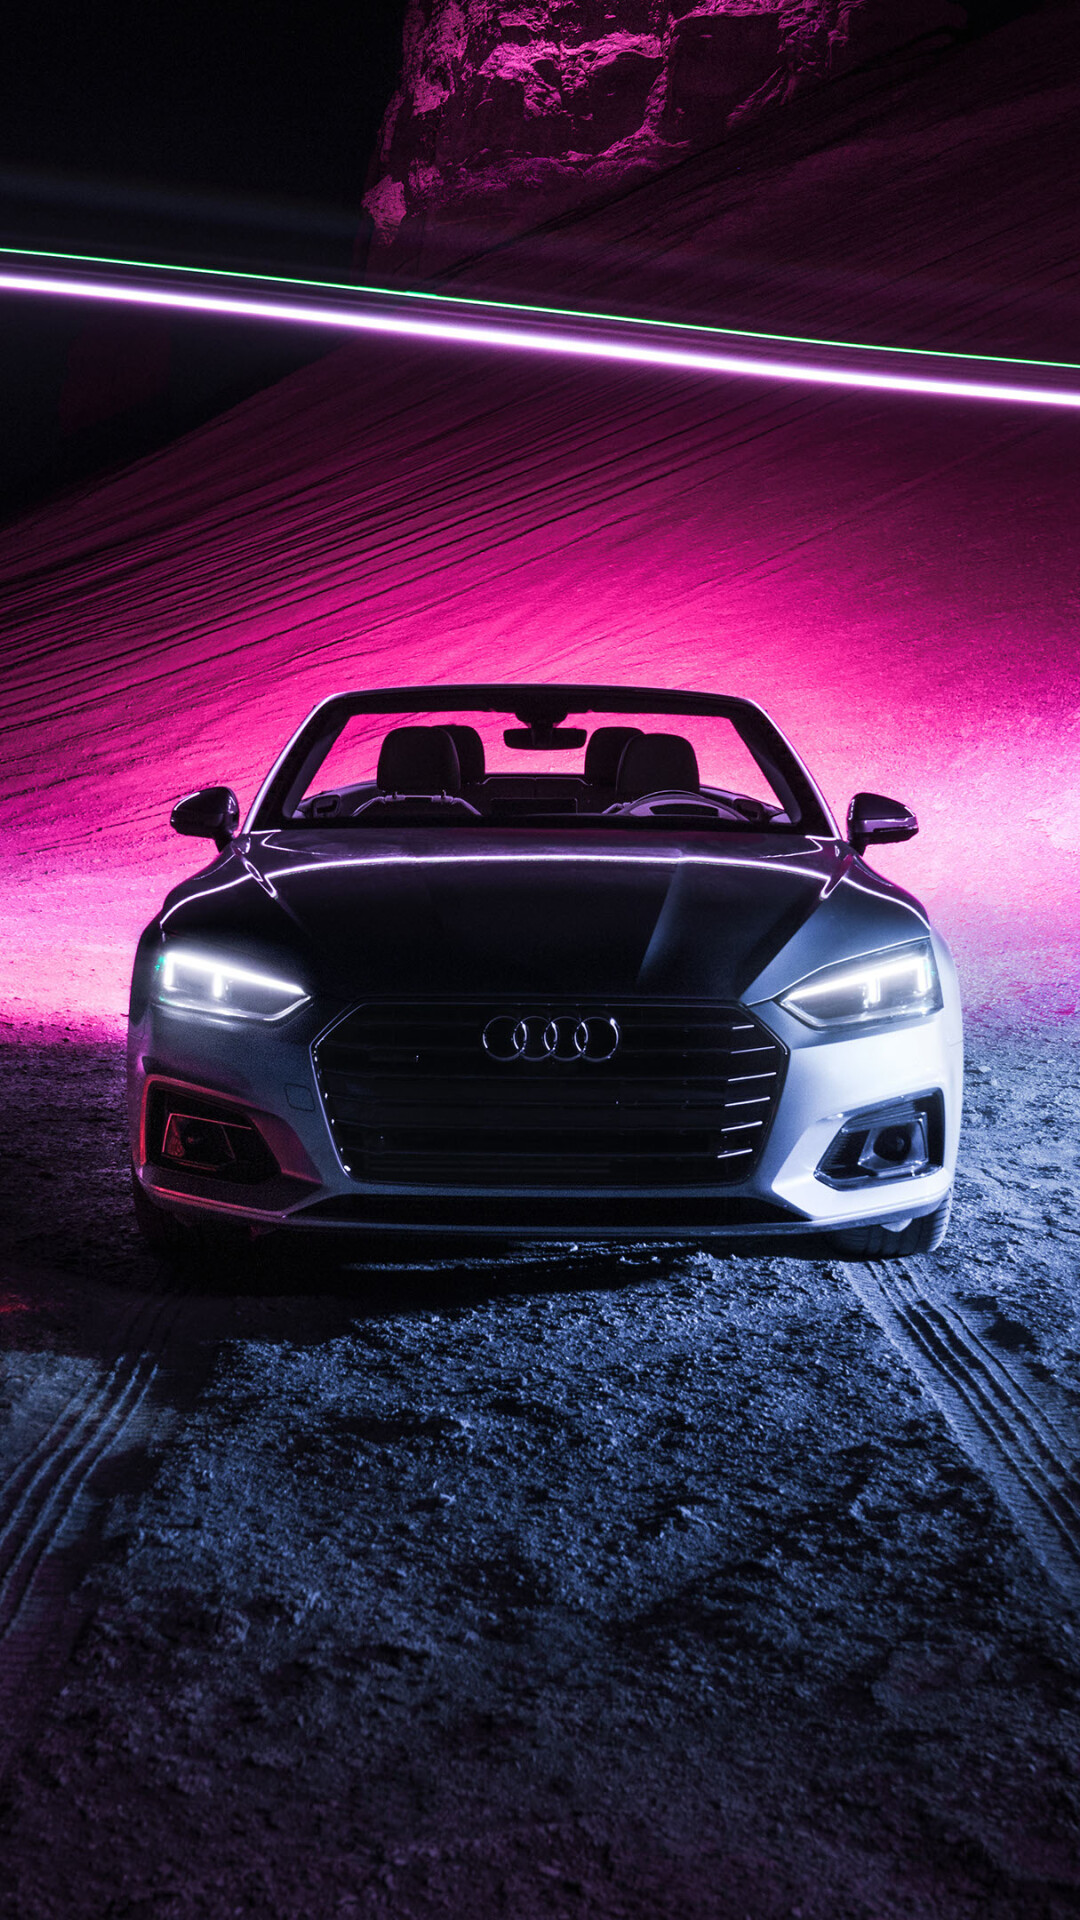 Audi: One of three best-selling luxury automakers in the world, A forerunner in the industry for over 100 years. 1080x1920 Full HD Background.